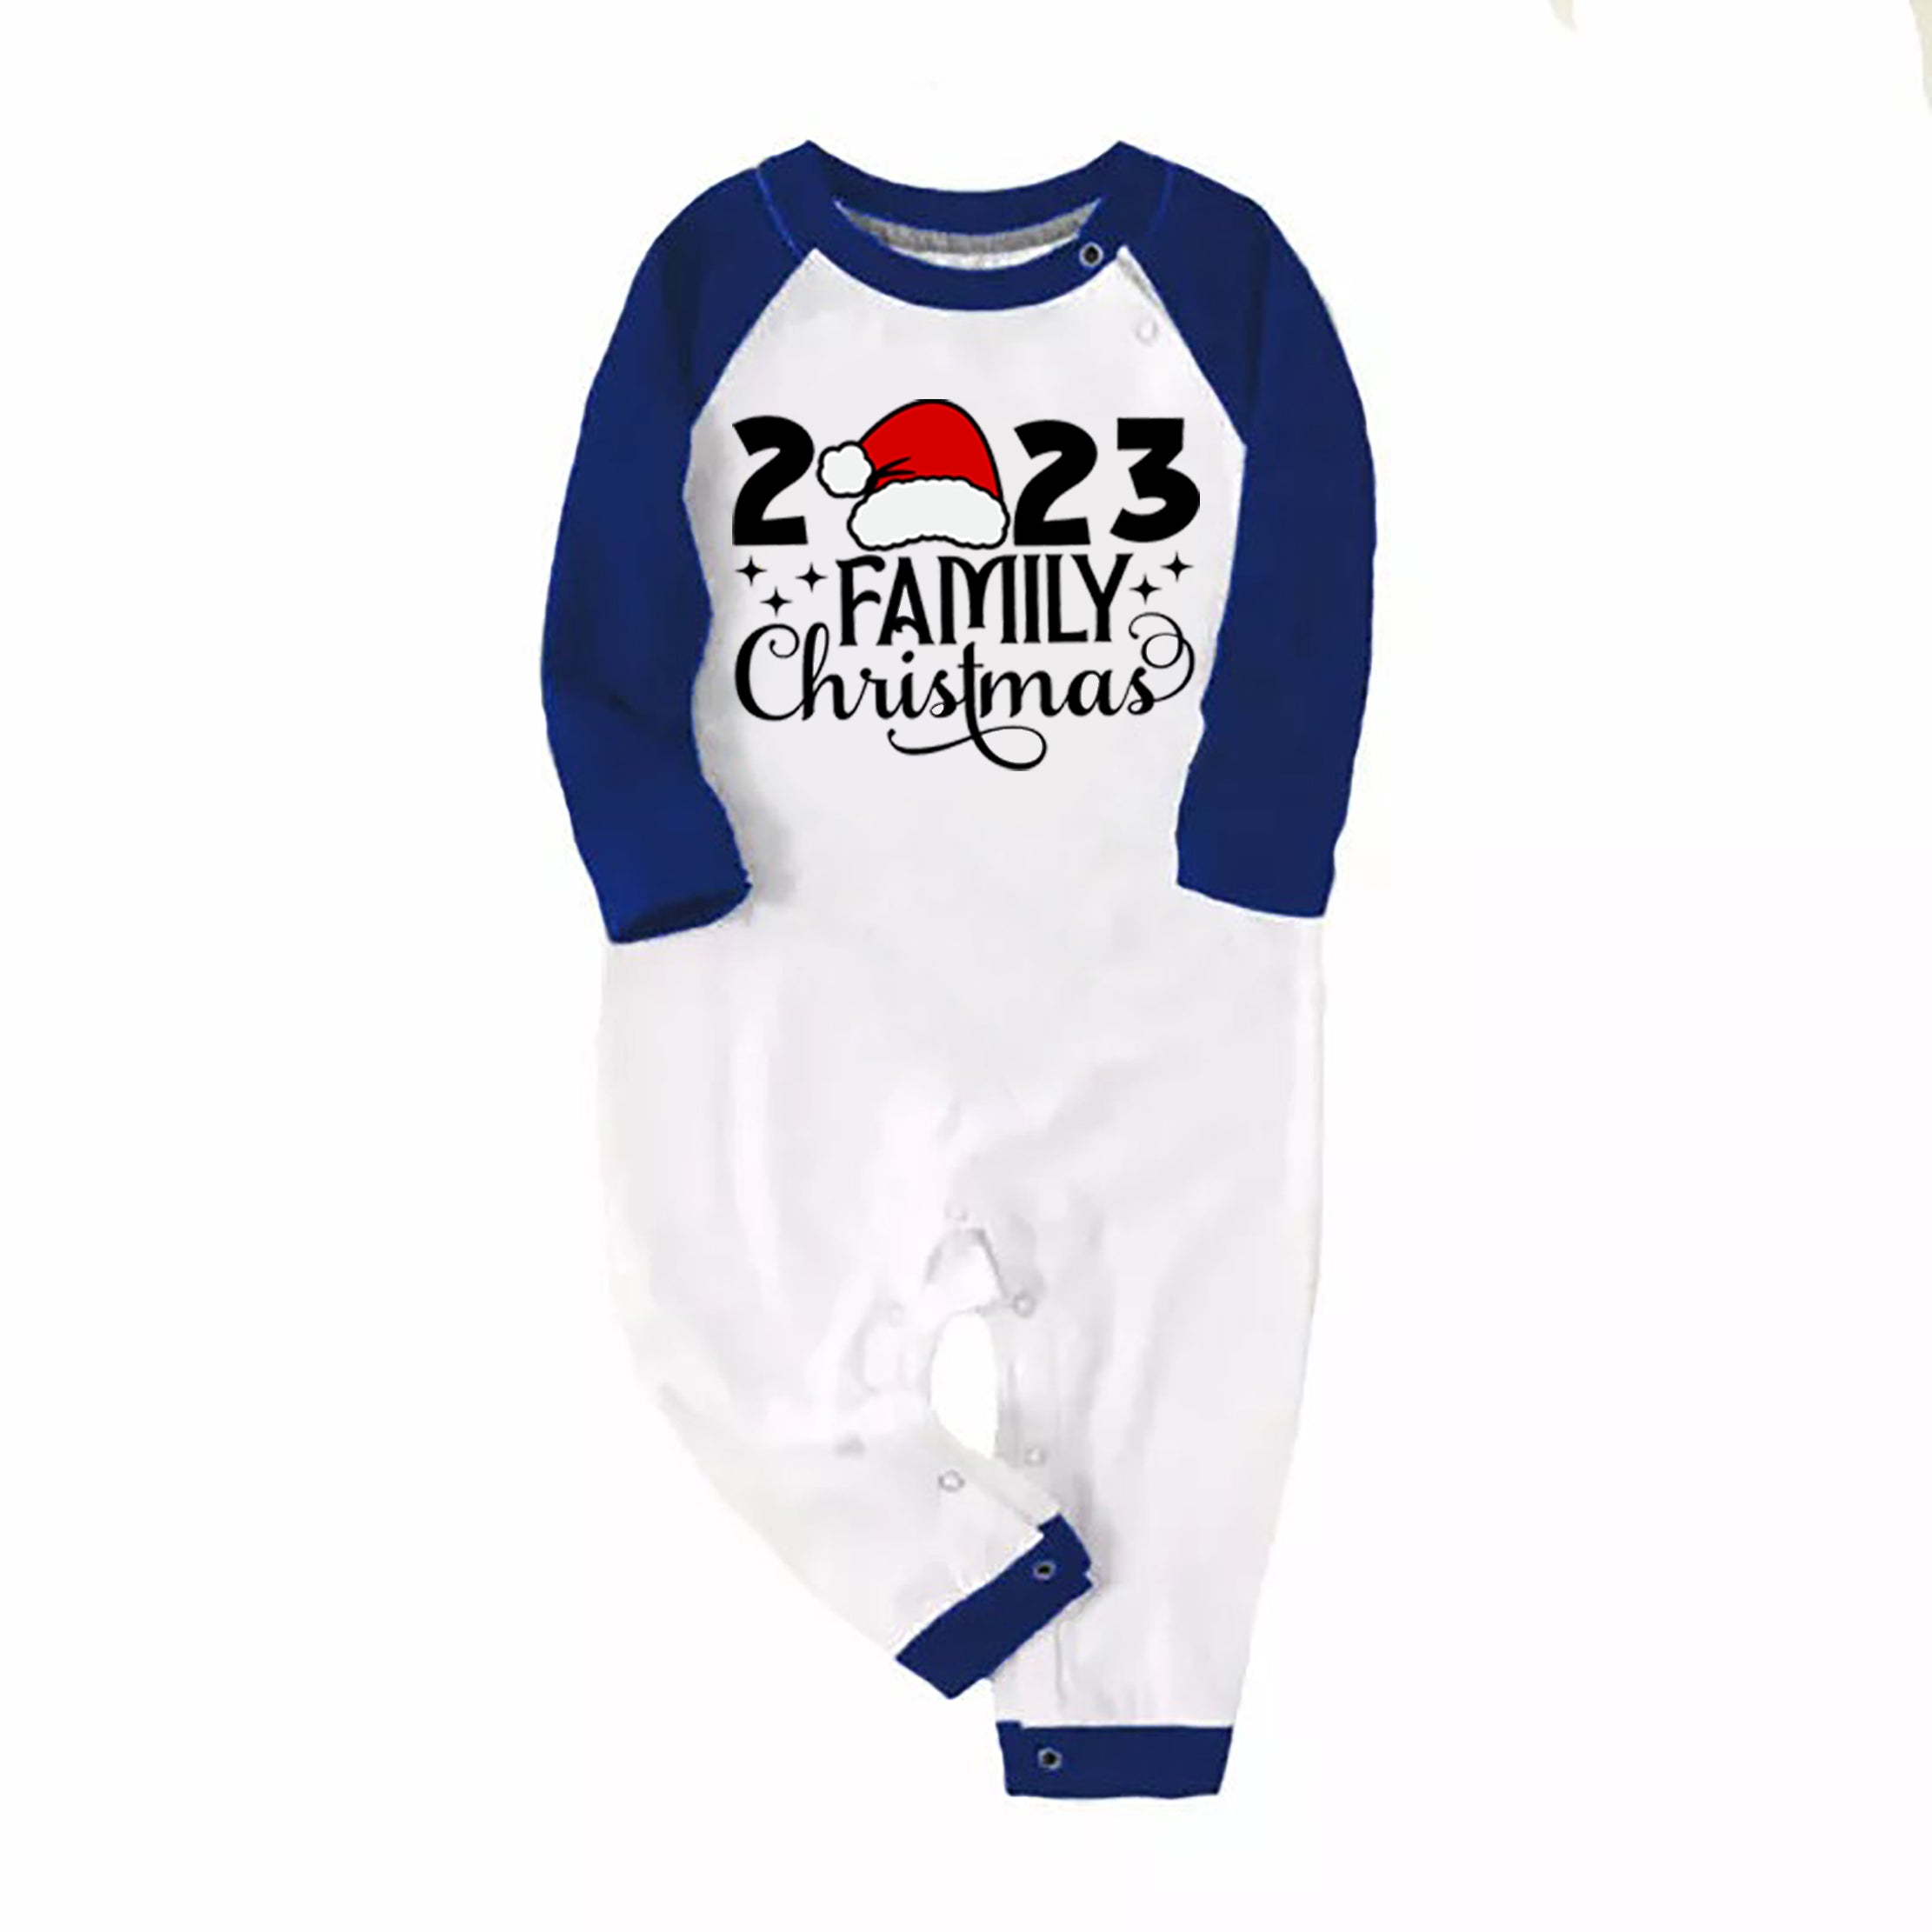 Christmas Cute Cartoon Santa Hat Patterned and '2023 FAMILY Christmas ' Letter Print Casual Long Sleeve Sweatshirts Contrast Blue & White Top and Black and Blue Plaid Pants Family Matching Pajamas Sets